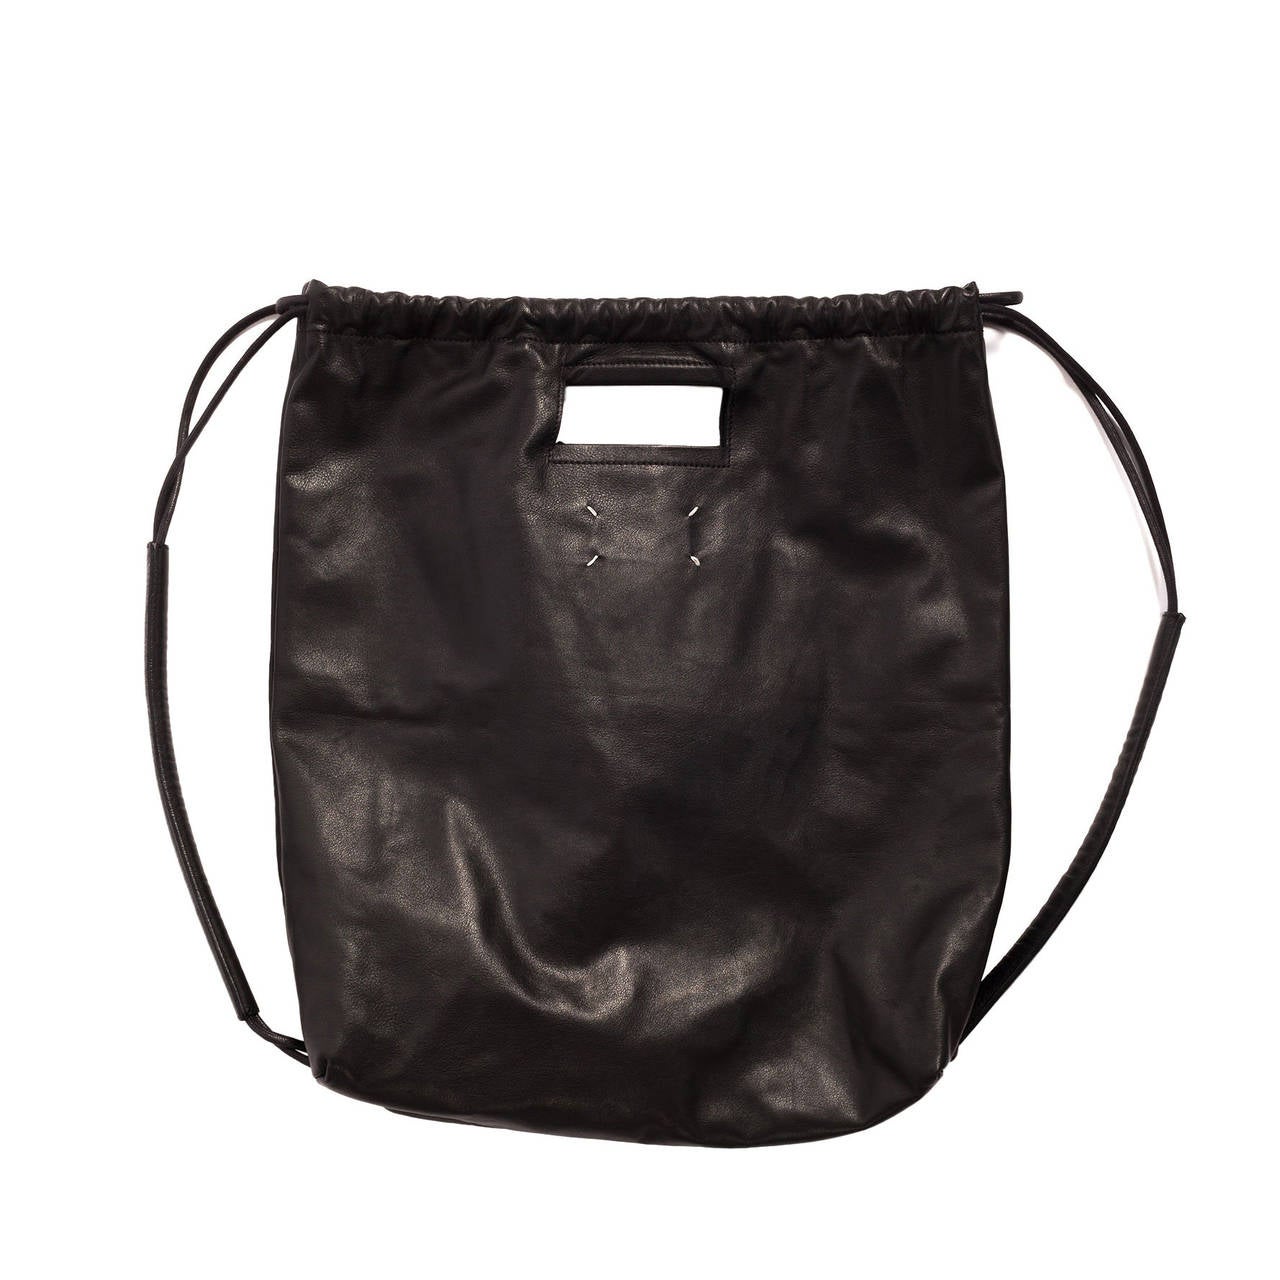 NEW Maison Martin Margiela black Backpack from SS15 'sold out'